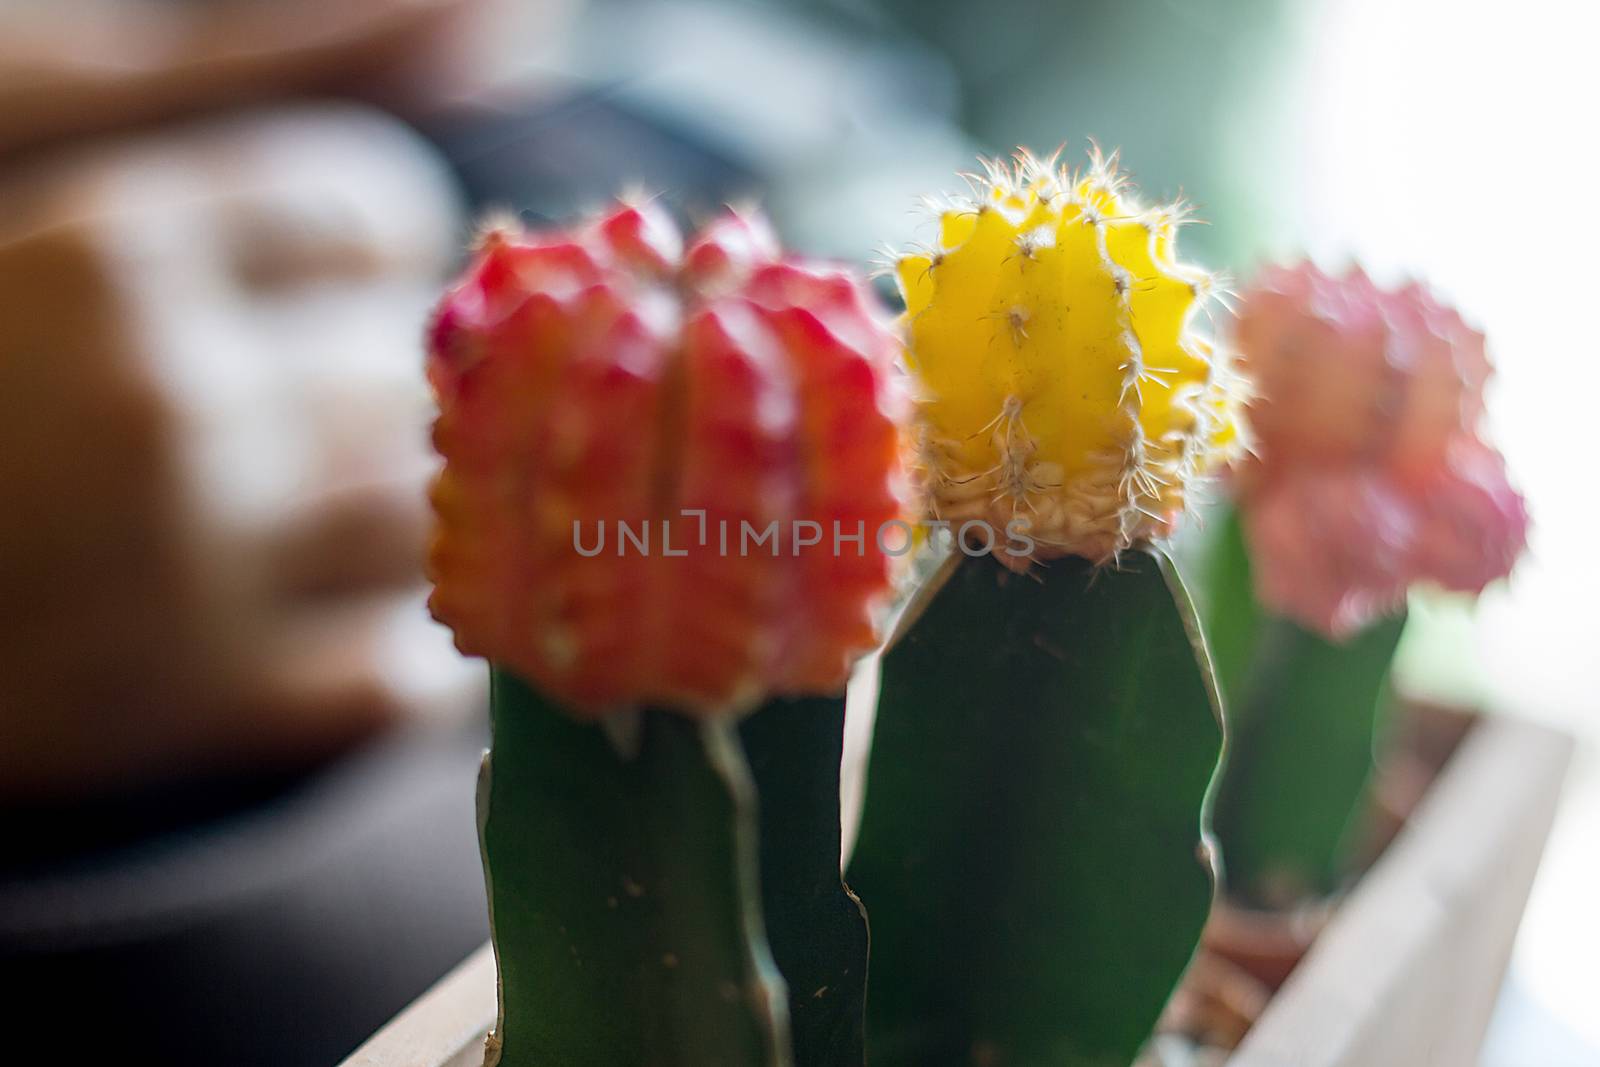 Many Cactus Colored Pots In Clay Pots On Wooden Table With Soft  by rakoptonLPN